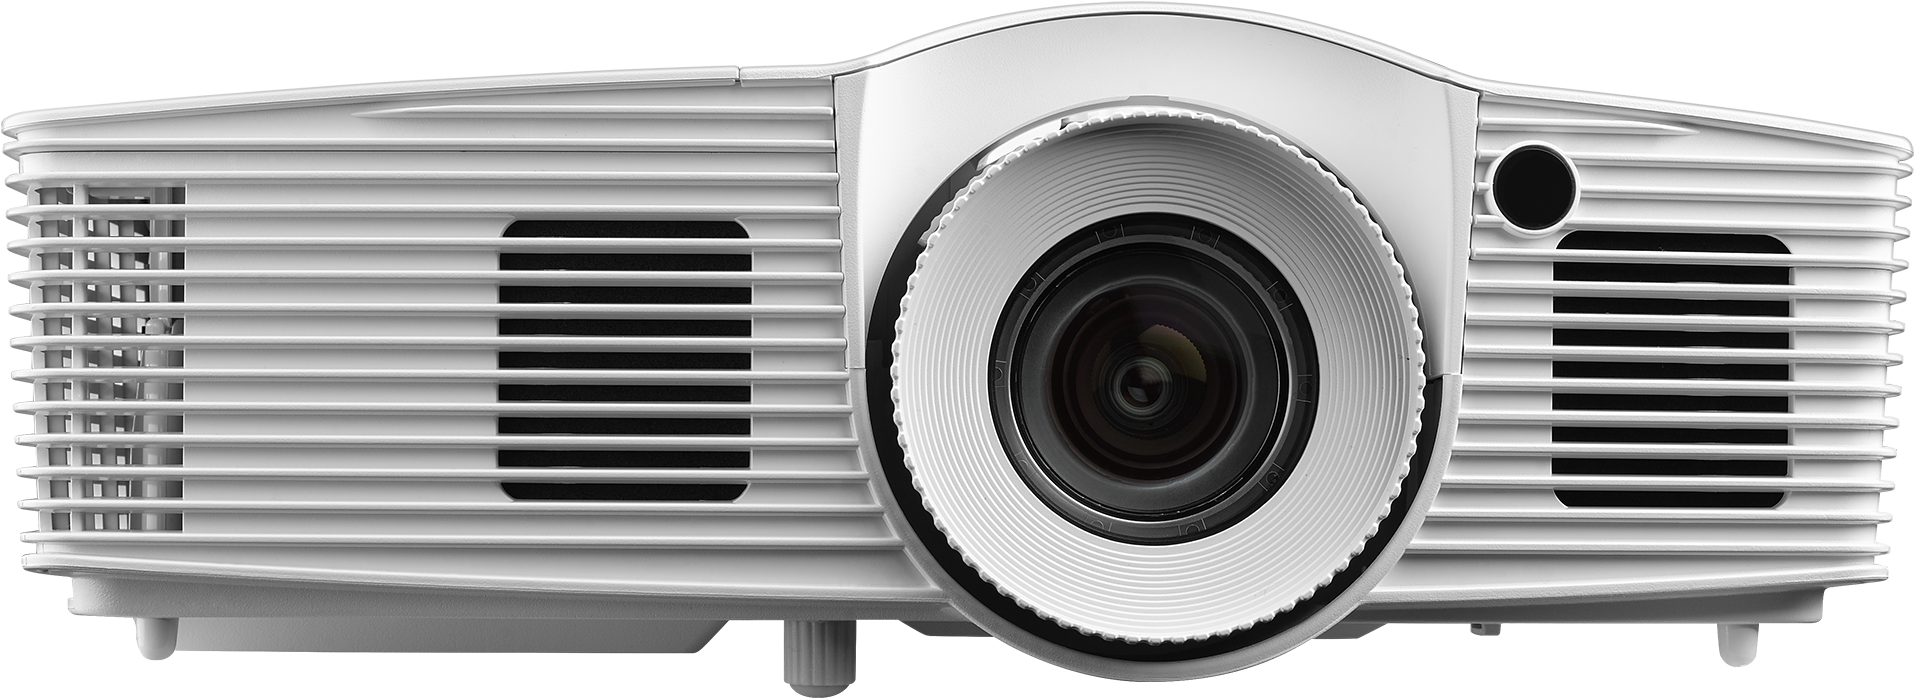 Home Theater Projector PNG Transparent Image